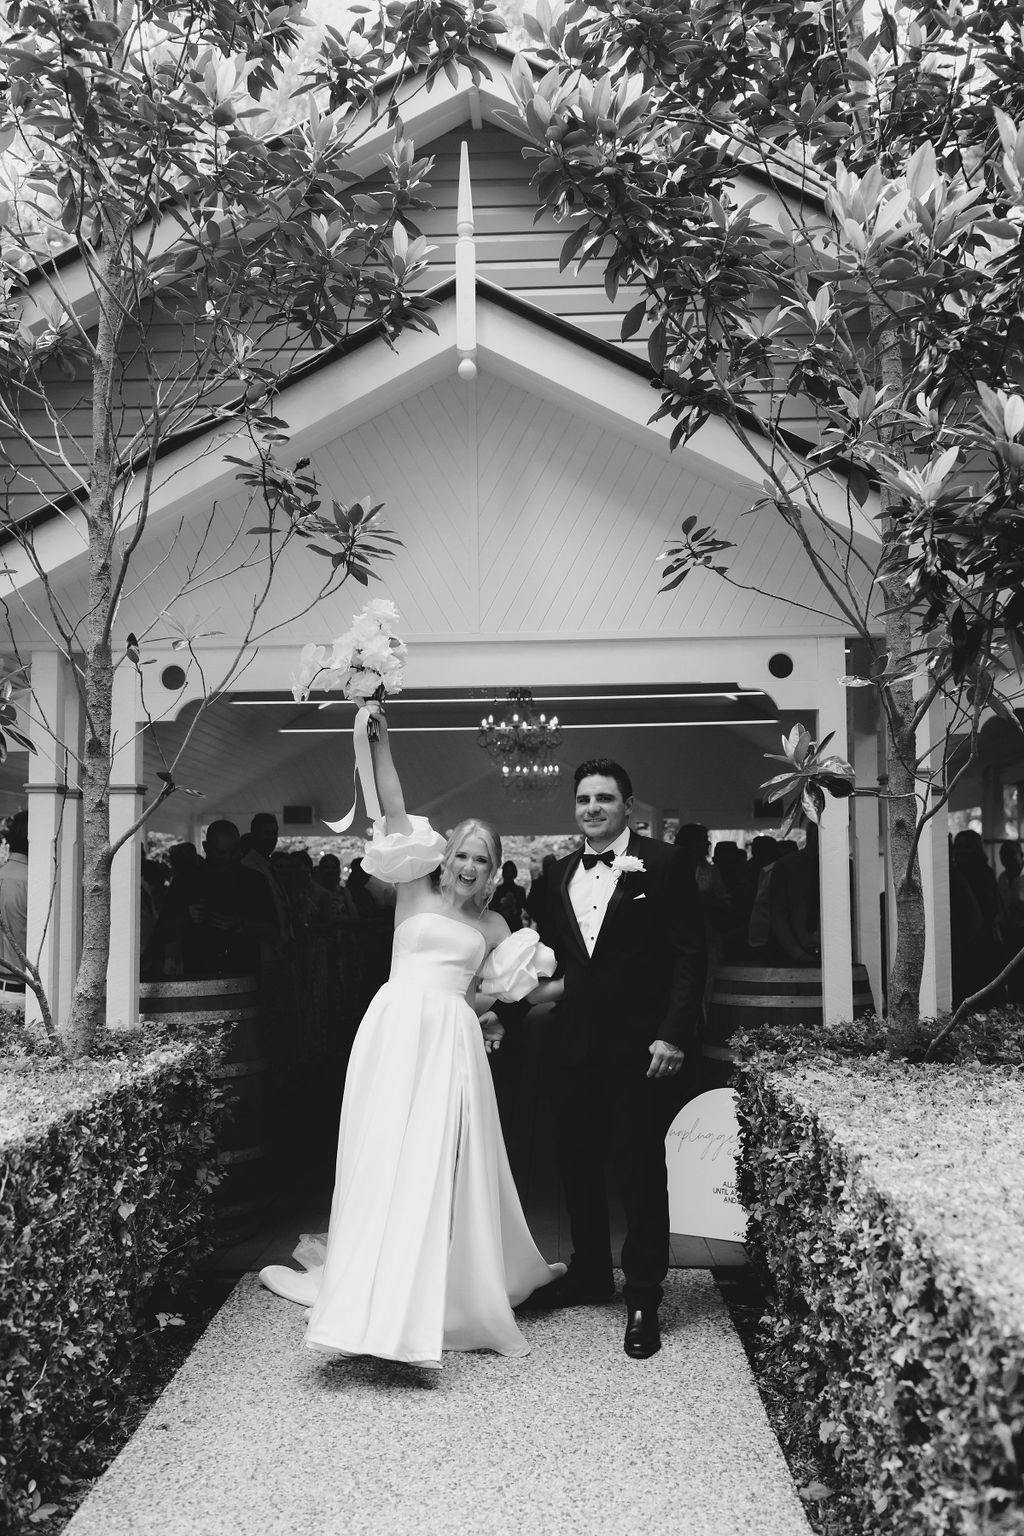 A bride in a white gown and a groom in a tuxedo stand joyfully outside a small chapel adorned with greenery. The bride holds a bouquet high in celebration while the groom smiles beside her. Trees frame the pathway leading to the chapel.